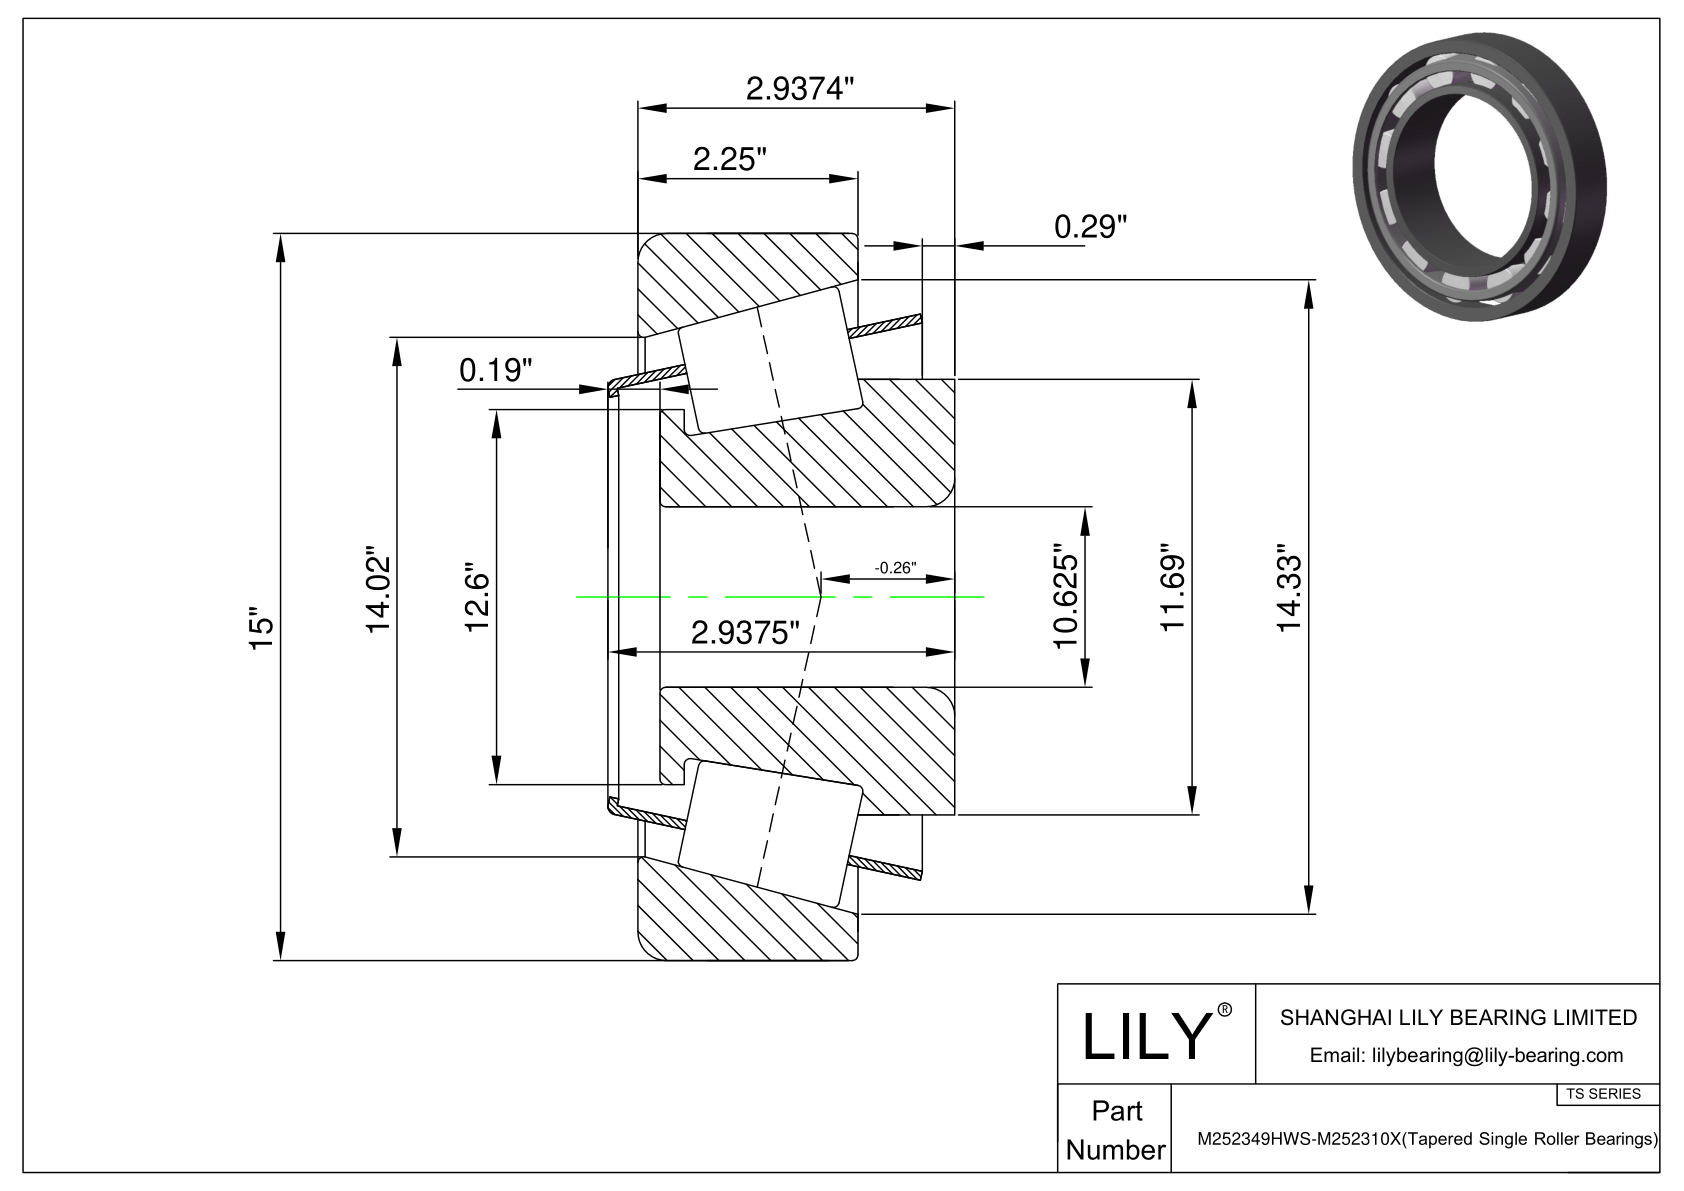 M252349HWS-M252310X TS (Tapered Single Roller Bearings) (Imperial) cad drawing